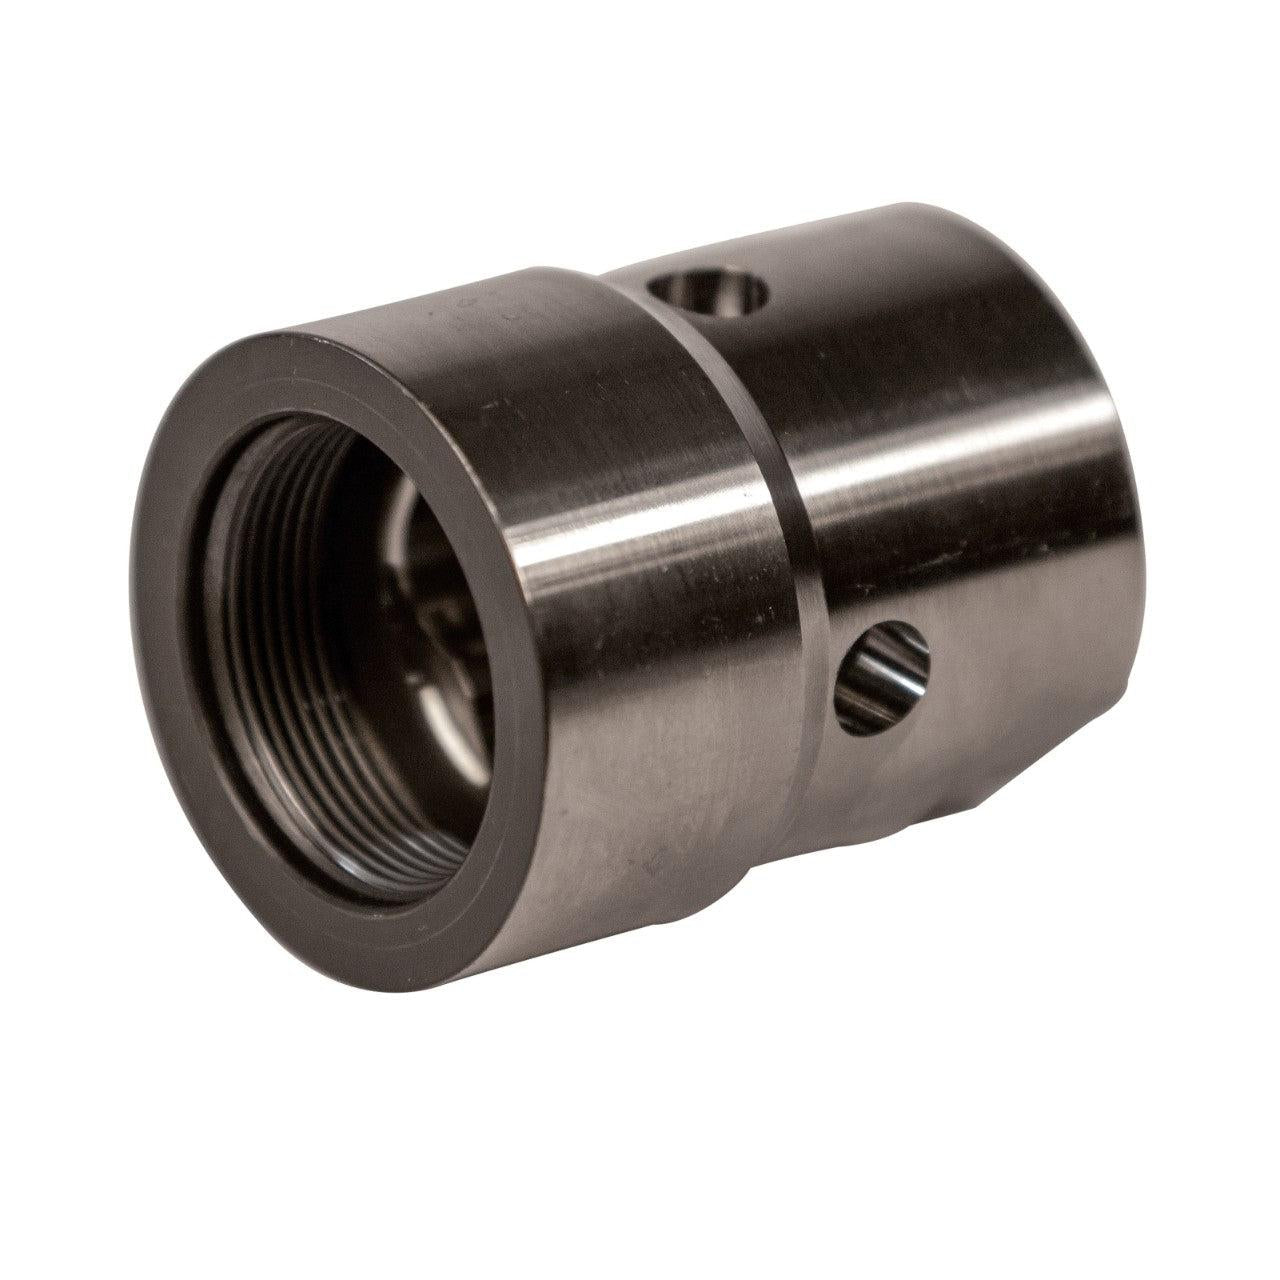 Guide Ball Piston for Dura-Flo 1800 (430 cc) Lowers